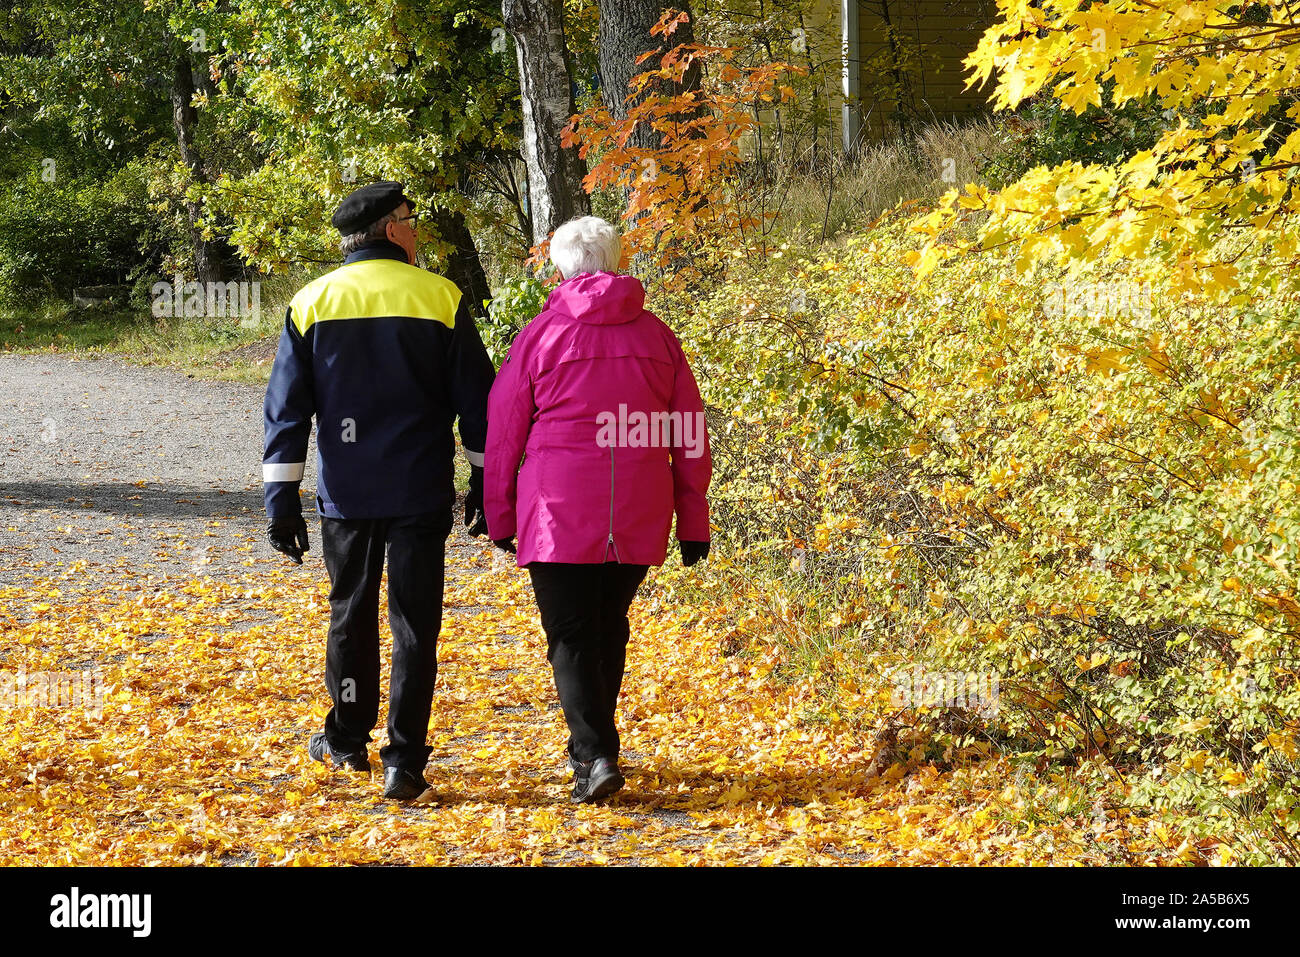 Turku, Finland - October 5, 2019: Older couple walking on path, tree has dropped leaves to walkway. Location: Ruissalo island Stock Photo